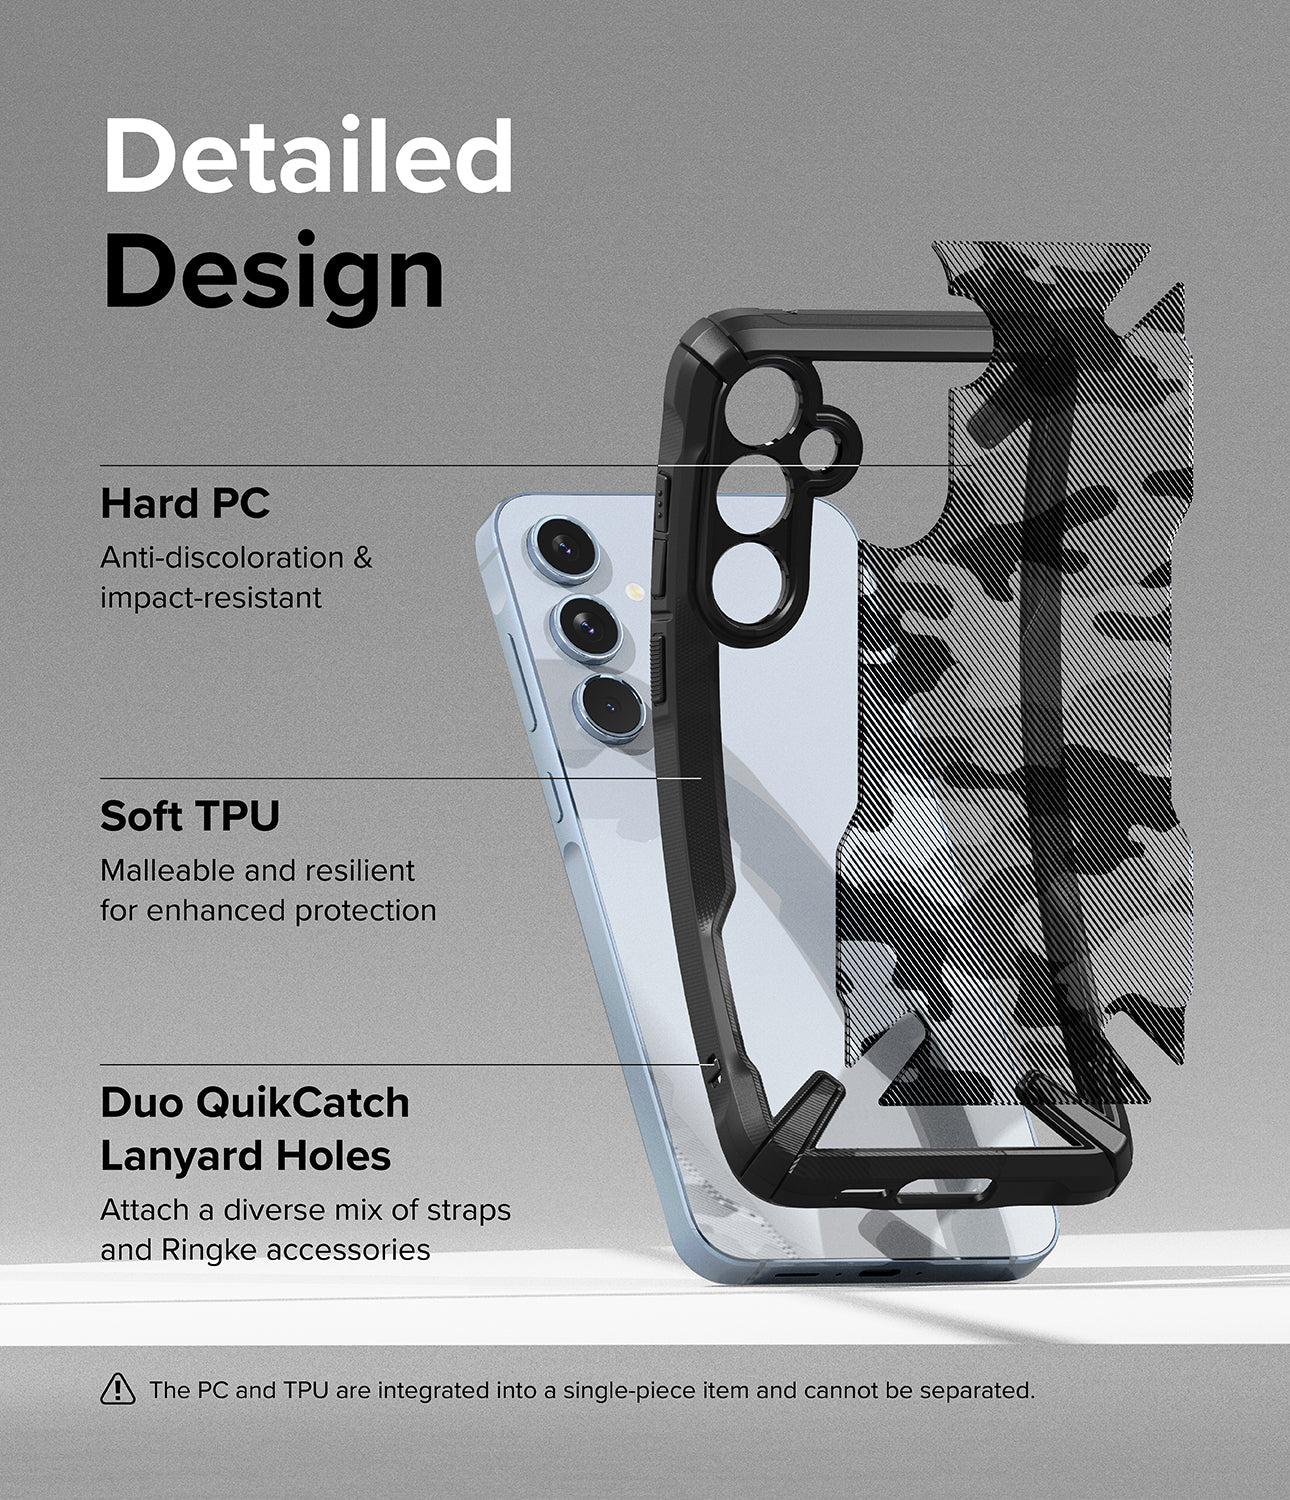 Galaxy A55 Case | Fusion-X - Detailed Design. Anti-discoloration and impact-resistant with Hard PC. Malleable and resilient for enhanced protection with Soft TPU. Duo QuikCatch Lanyard Holes to attach a diverse mix of straps and Ringke accessories.